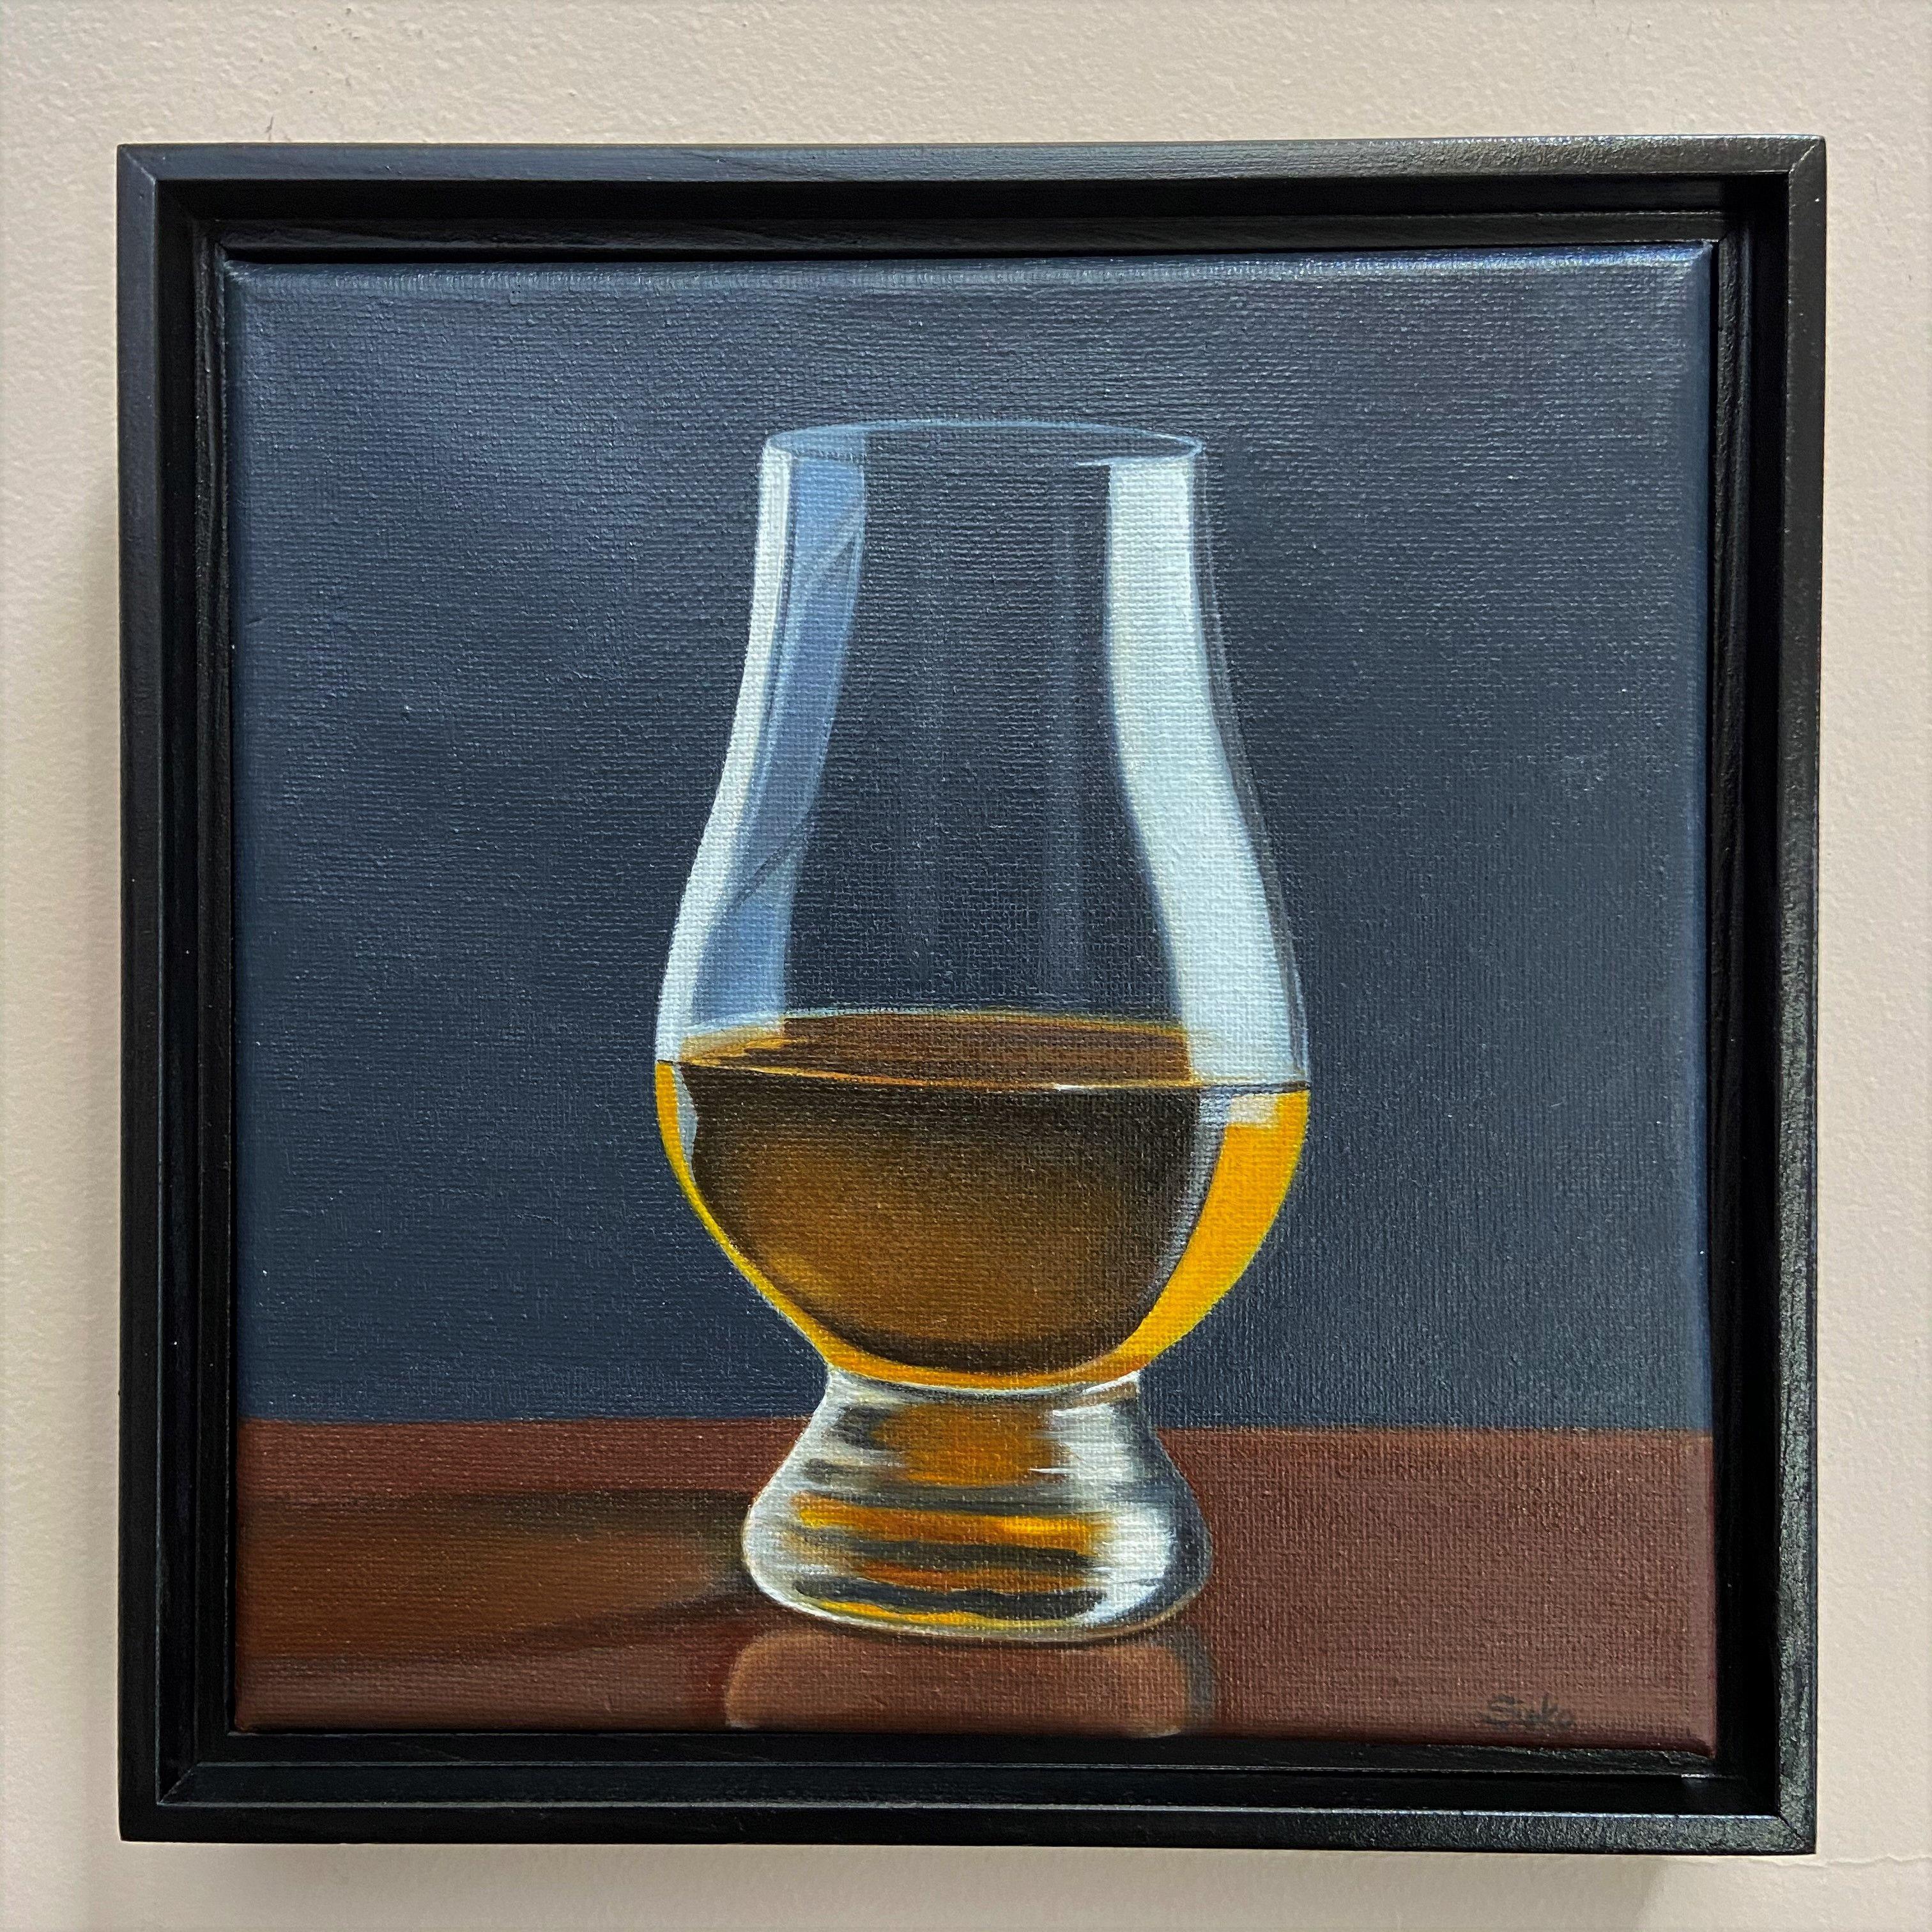 This a still life painting of a whiskey glass half filled with some whiskey.  It is my final painting of 2020 and a way to say goodbye to this year of the pandemic.  It is an 8 x 8 oil on canvas and painted in a realistic manner.  It will look